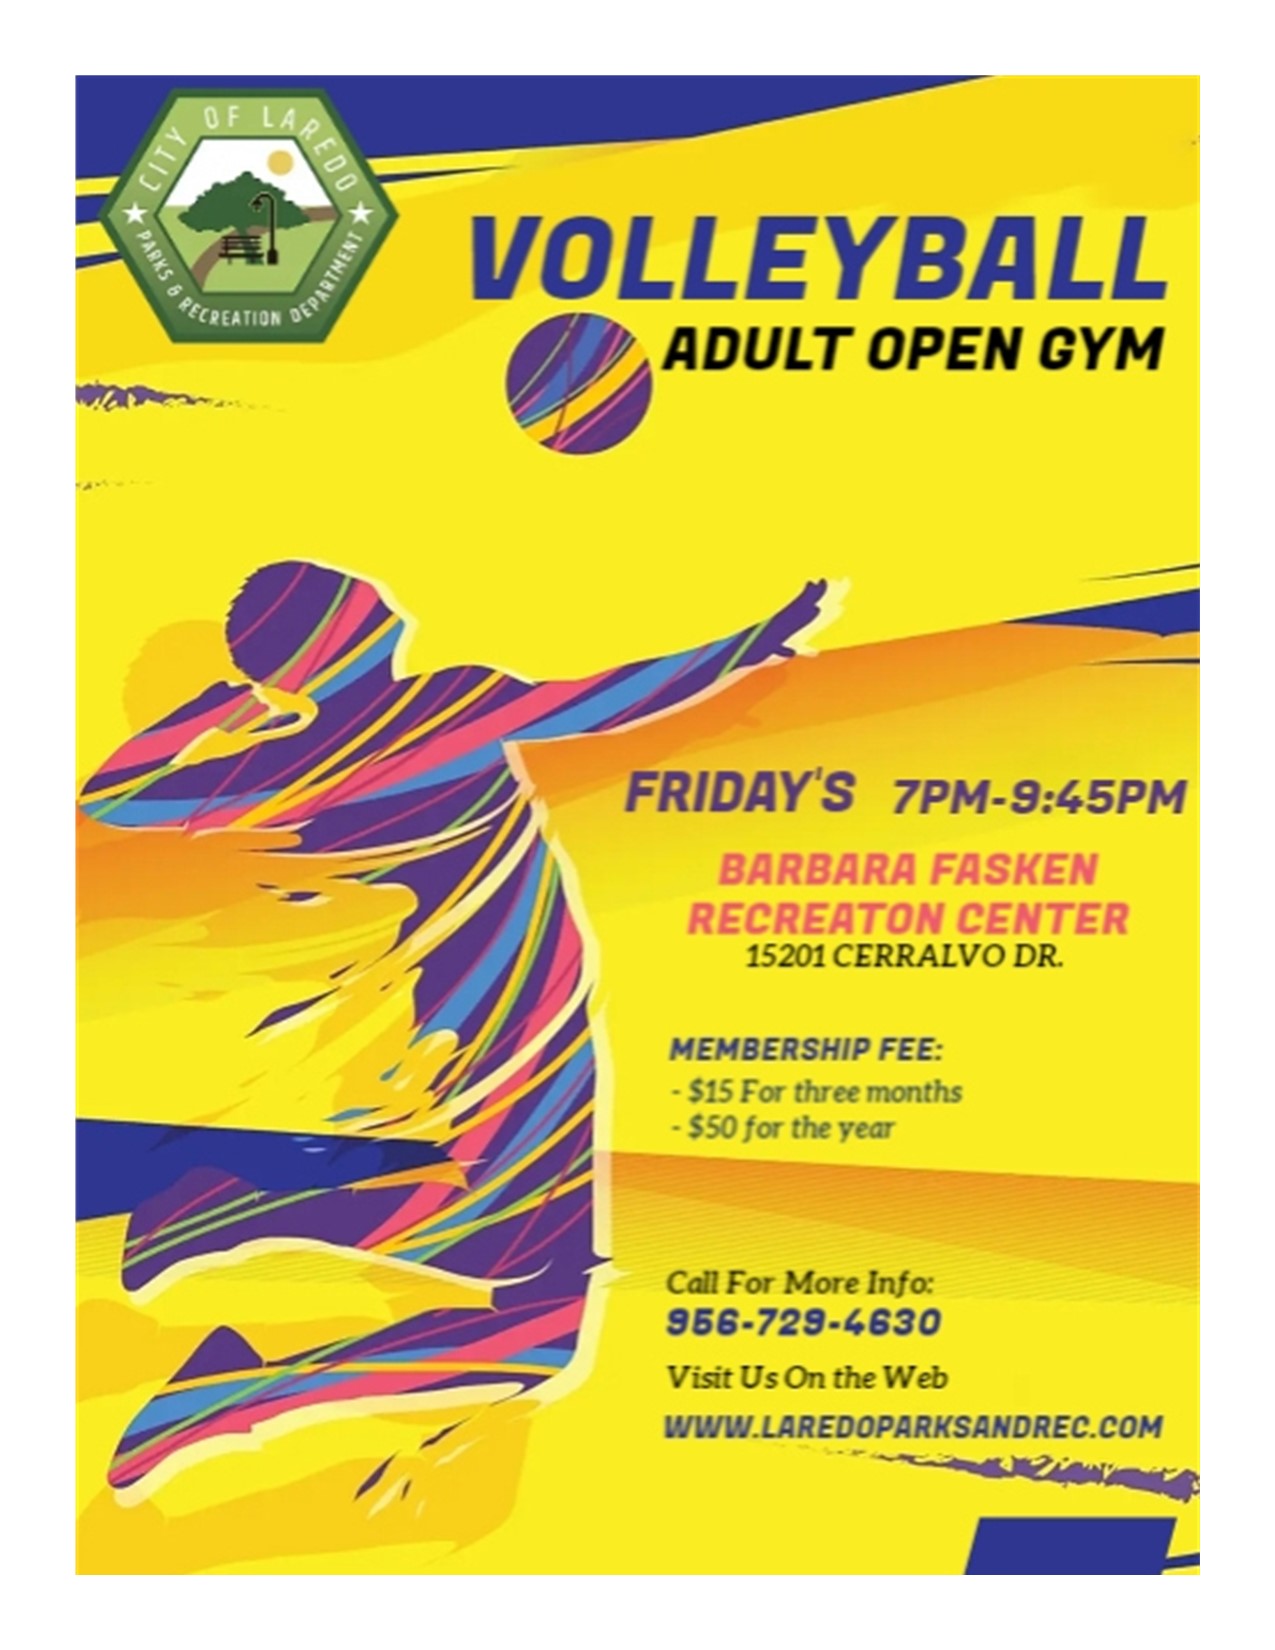 Open Gym Volleyball Flyer